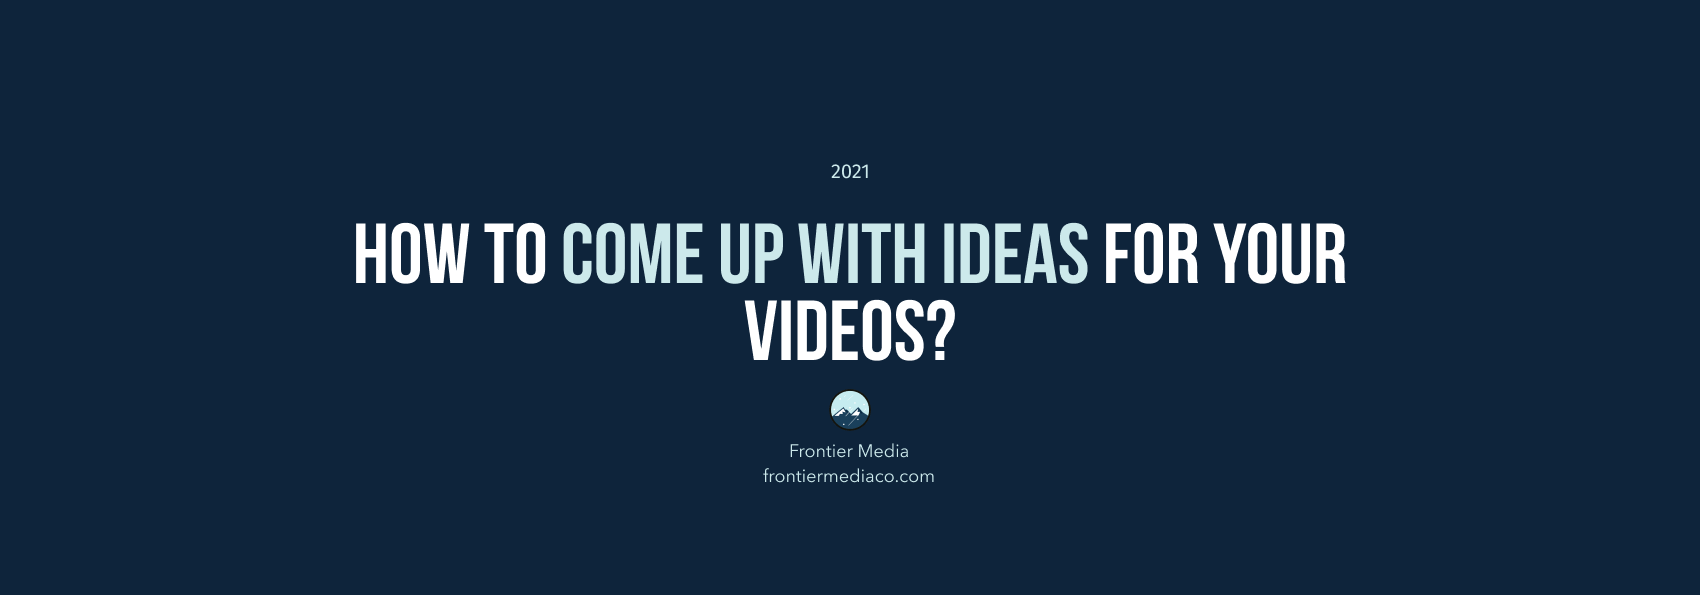 How to Come Up with Ideas for Your Videos?